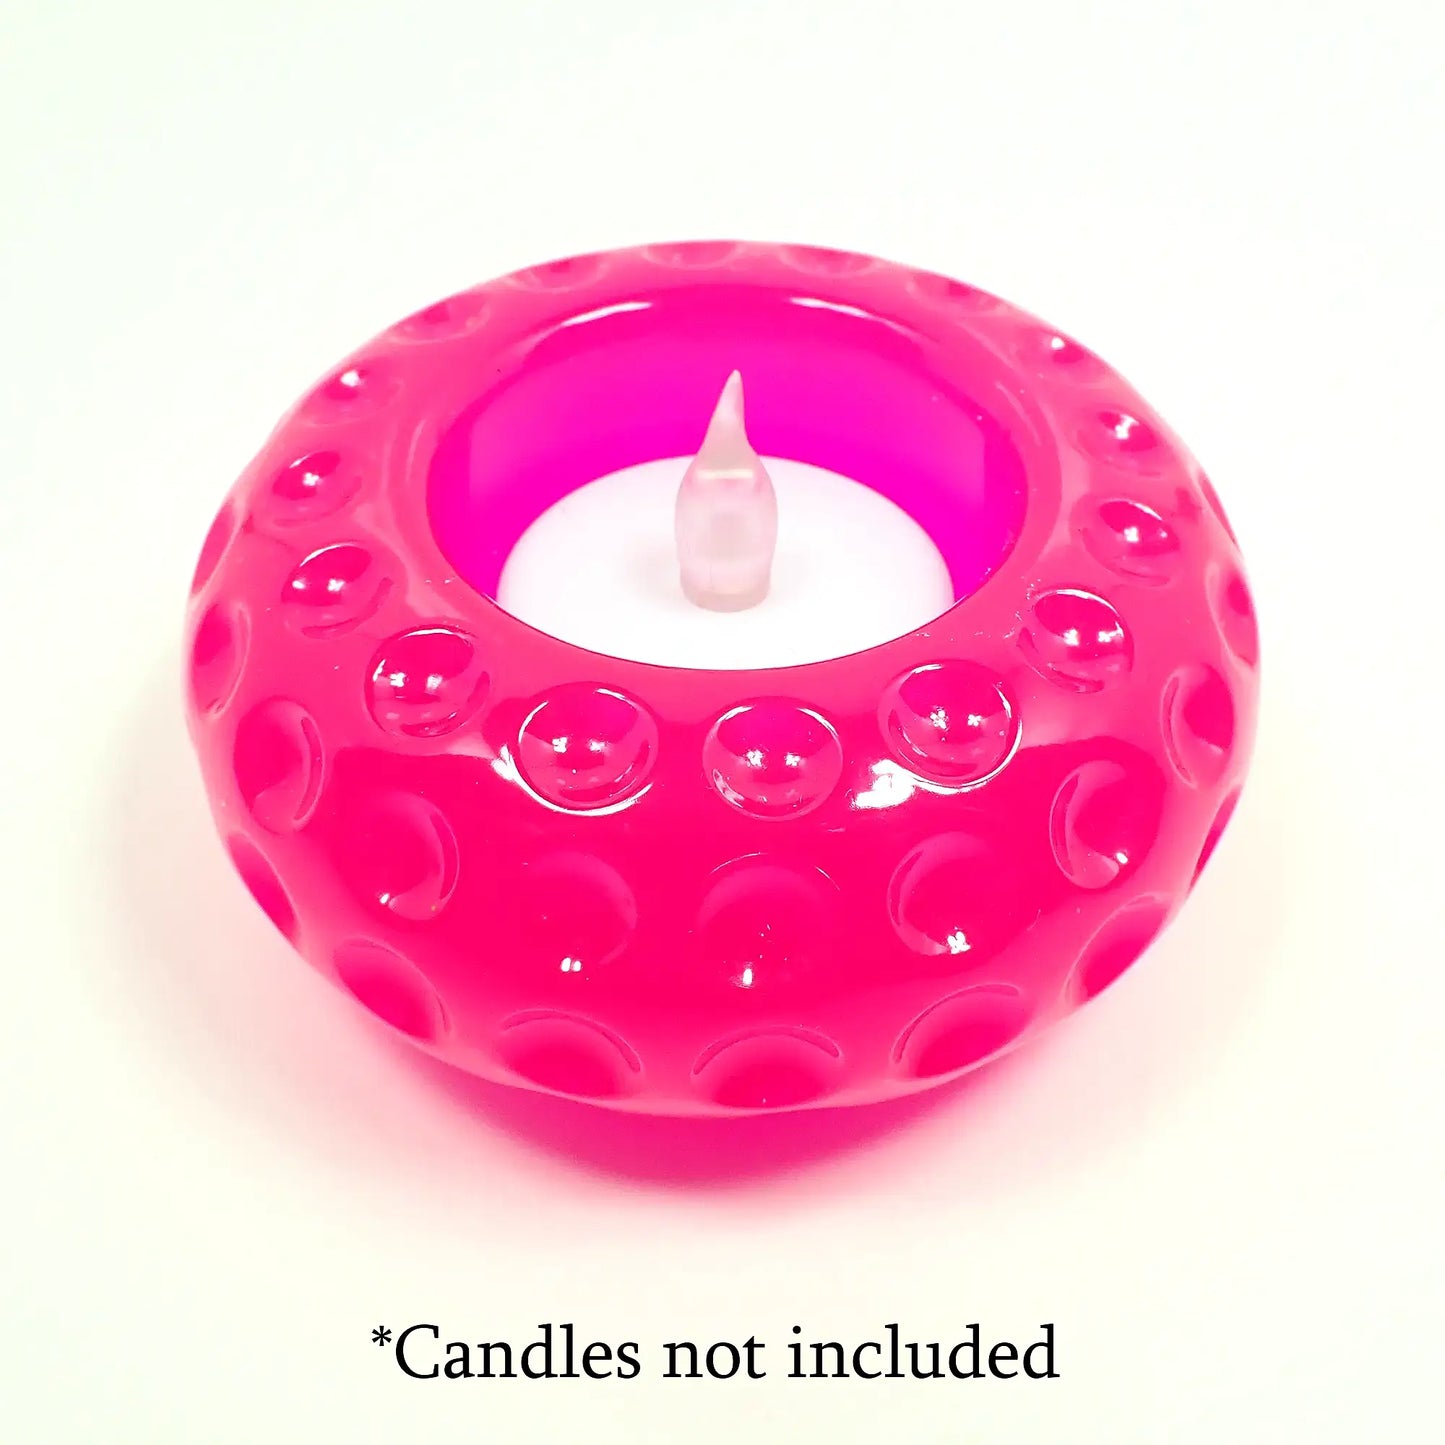 Small Handmade Neon Pink Resin Flameless Tea Light Candle Holder, Decorative Bowl, Rondelle Shaped with Indented Dot Pattern